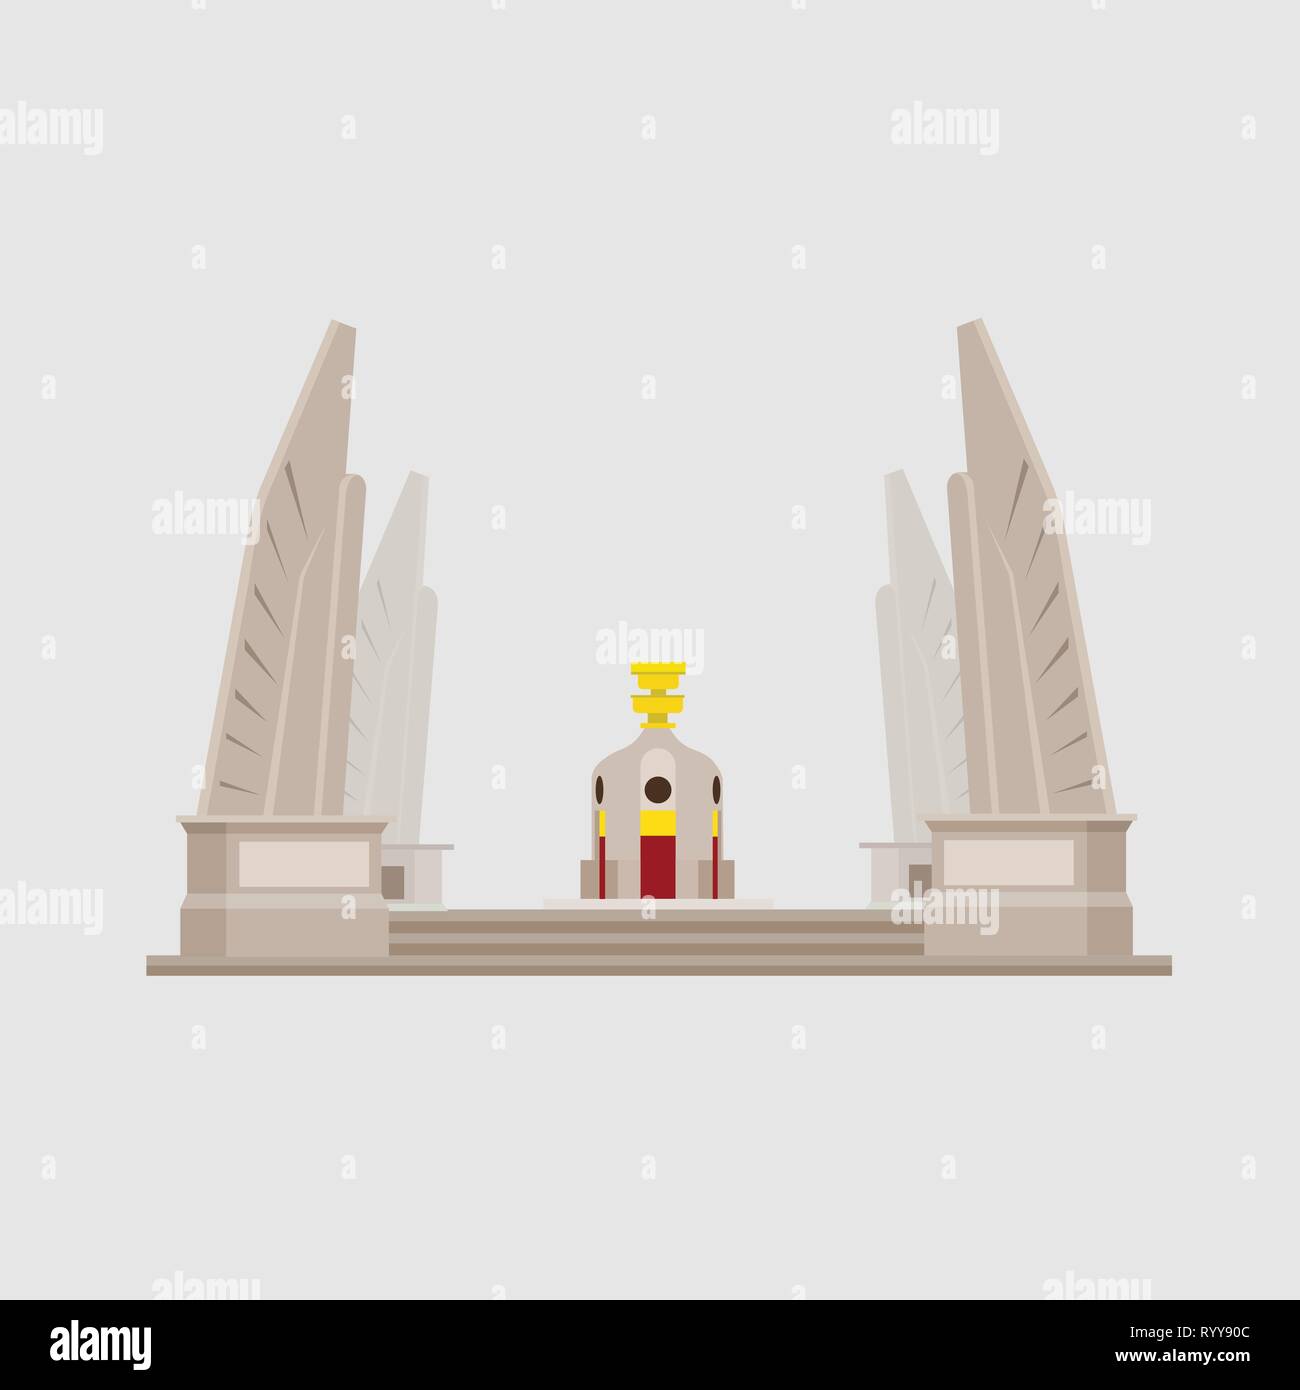 Thailand Monuments and Statues Objects Vector.Modern buiding icon Thailand; Stock Vector